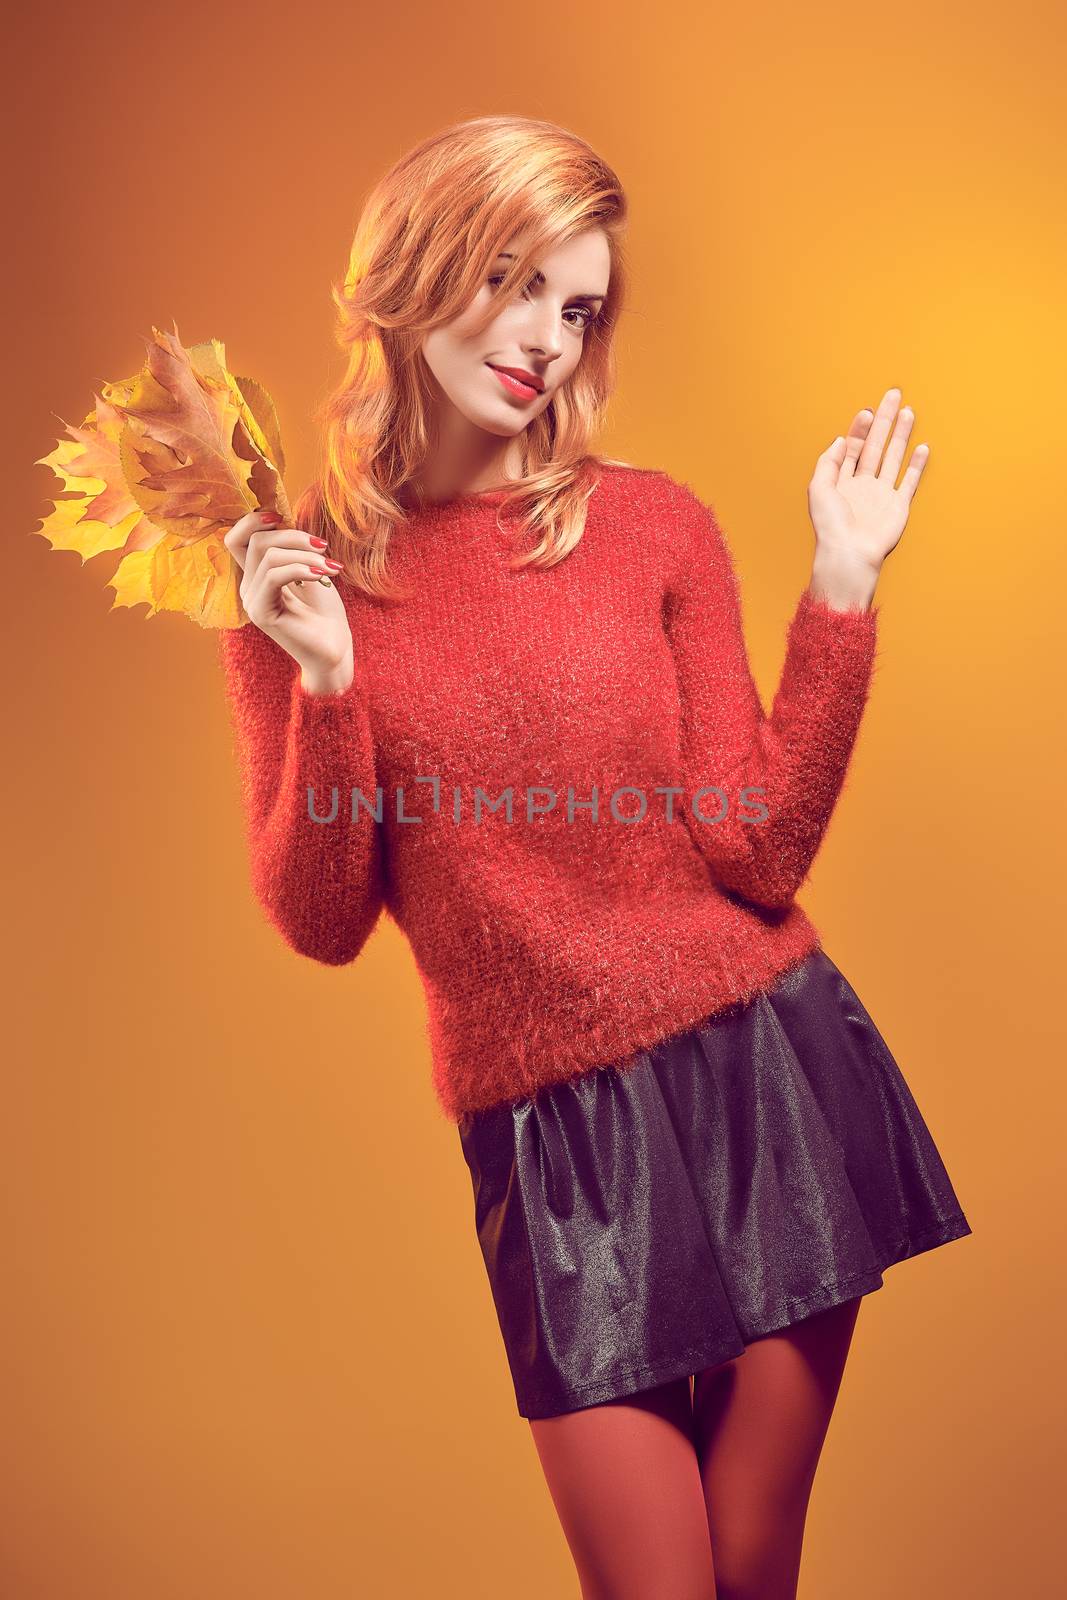 Beauty portrait redhead young model woman, autumn leafs in hands. Attractive happy playful girl in stylish red sweater, people. Retro, vintage, creative toned.Orange yellow background,copyspace